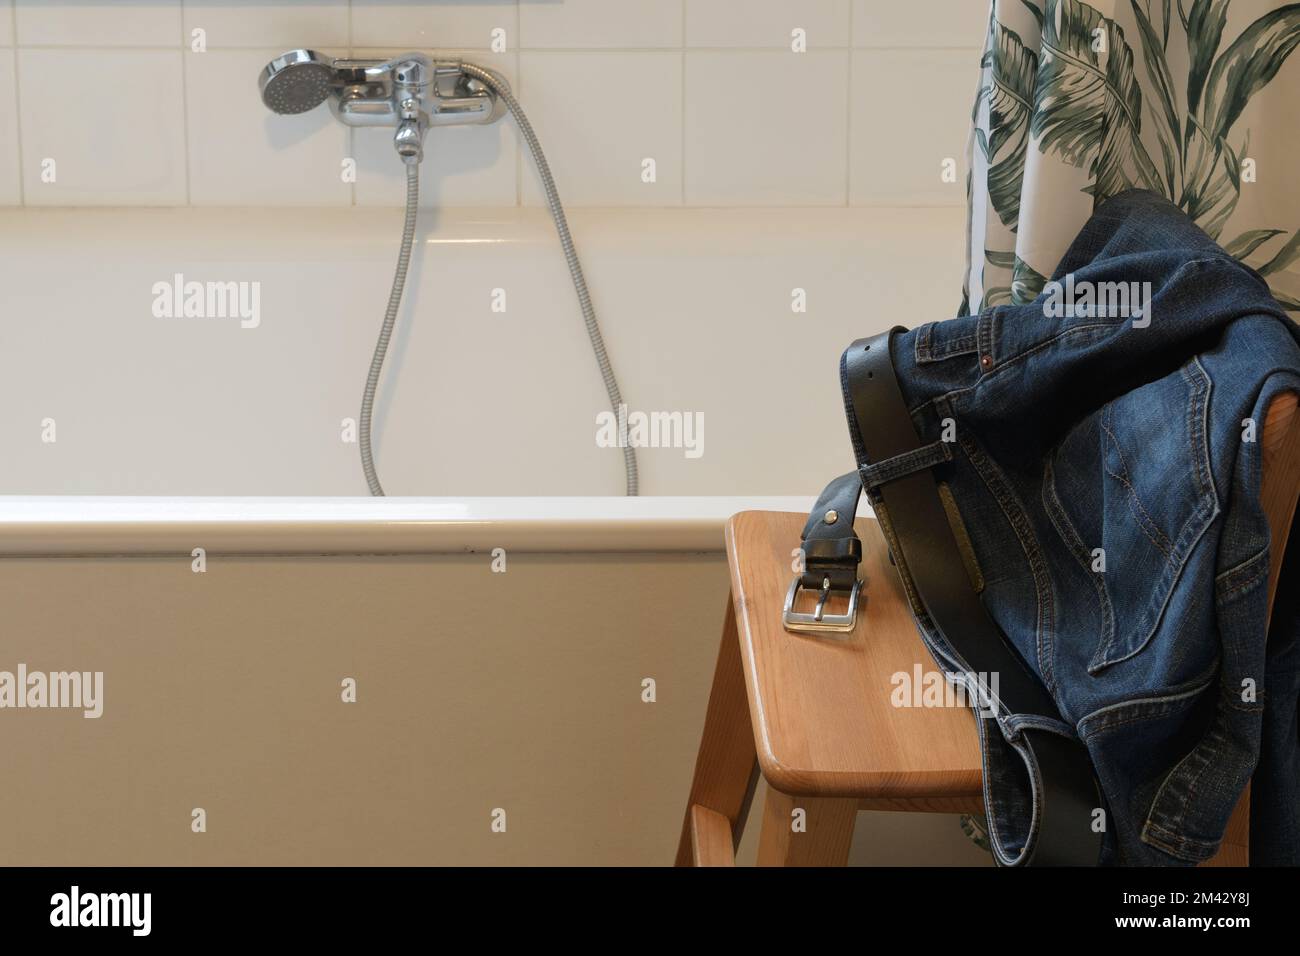 A bathtub and someone's jeans taken off. Before taking a bath or shower. Stock Photo